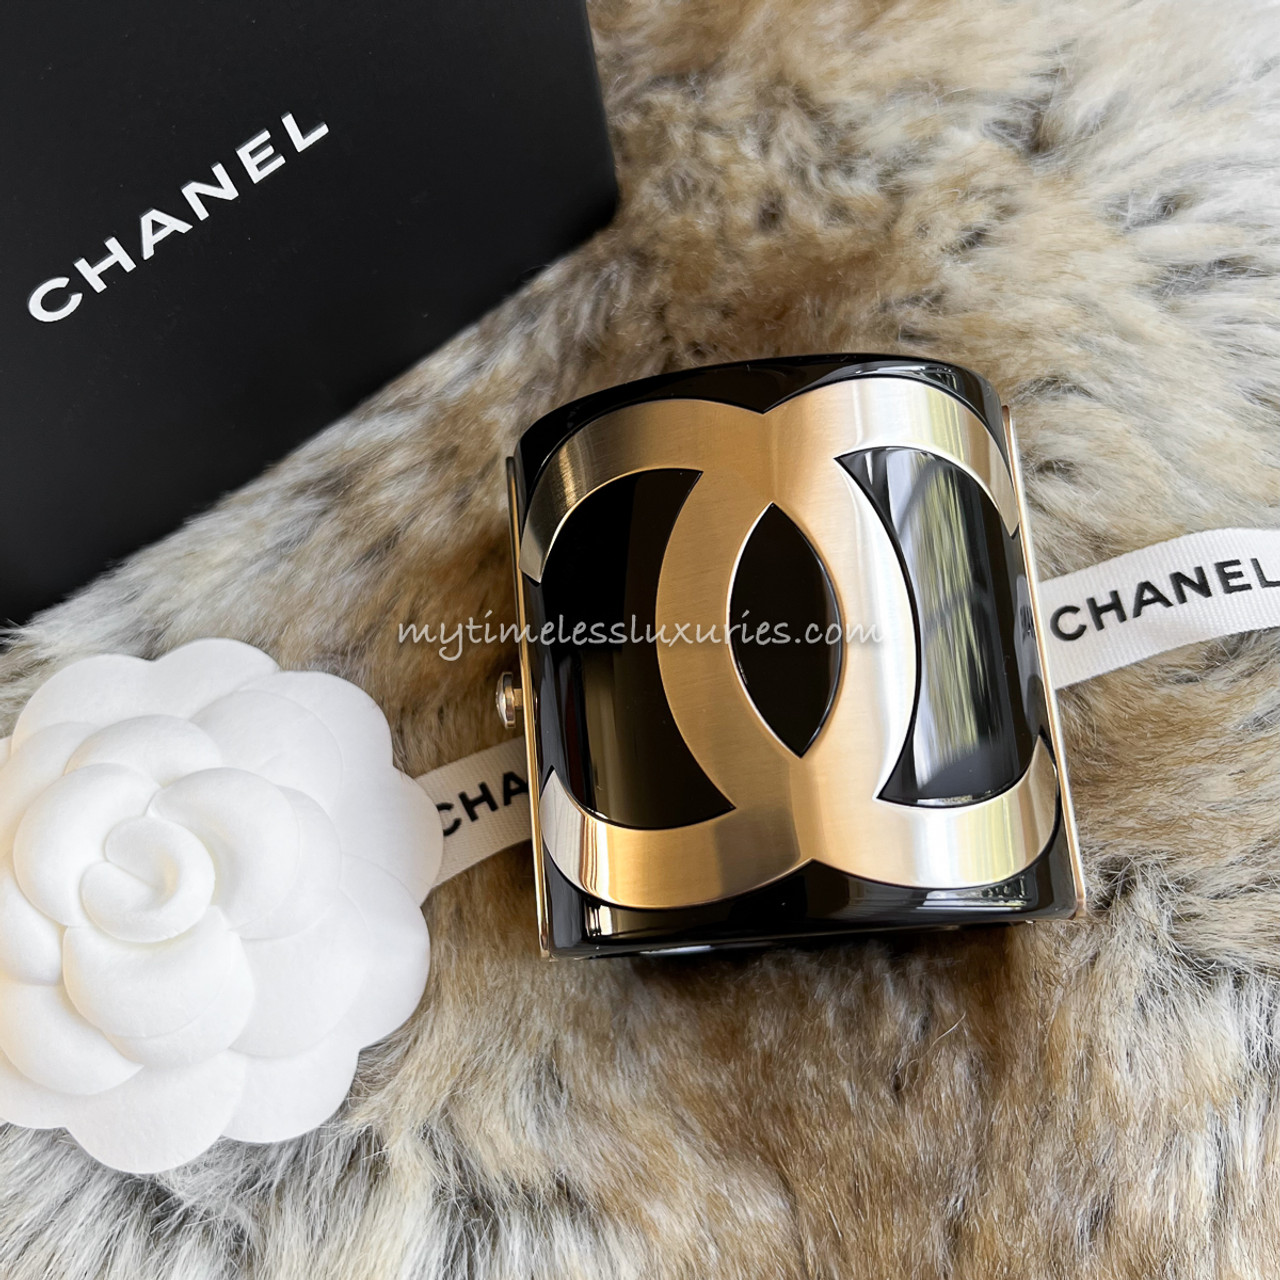 Chanel Vintage COCO Leather Cuff Bracelet in New Condition with original box